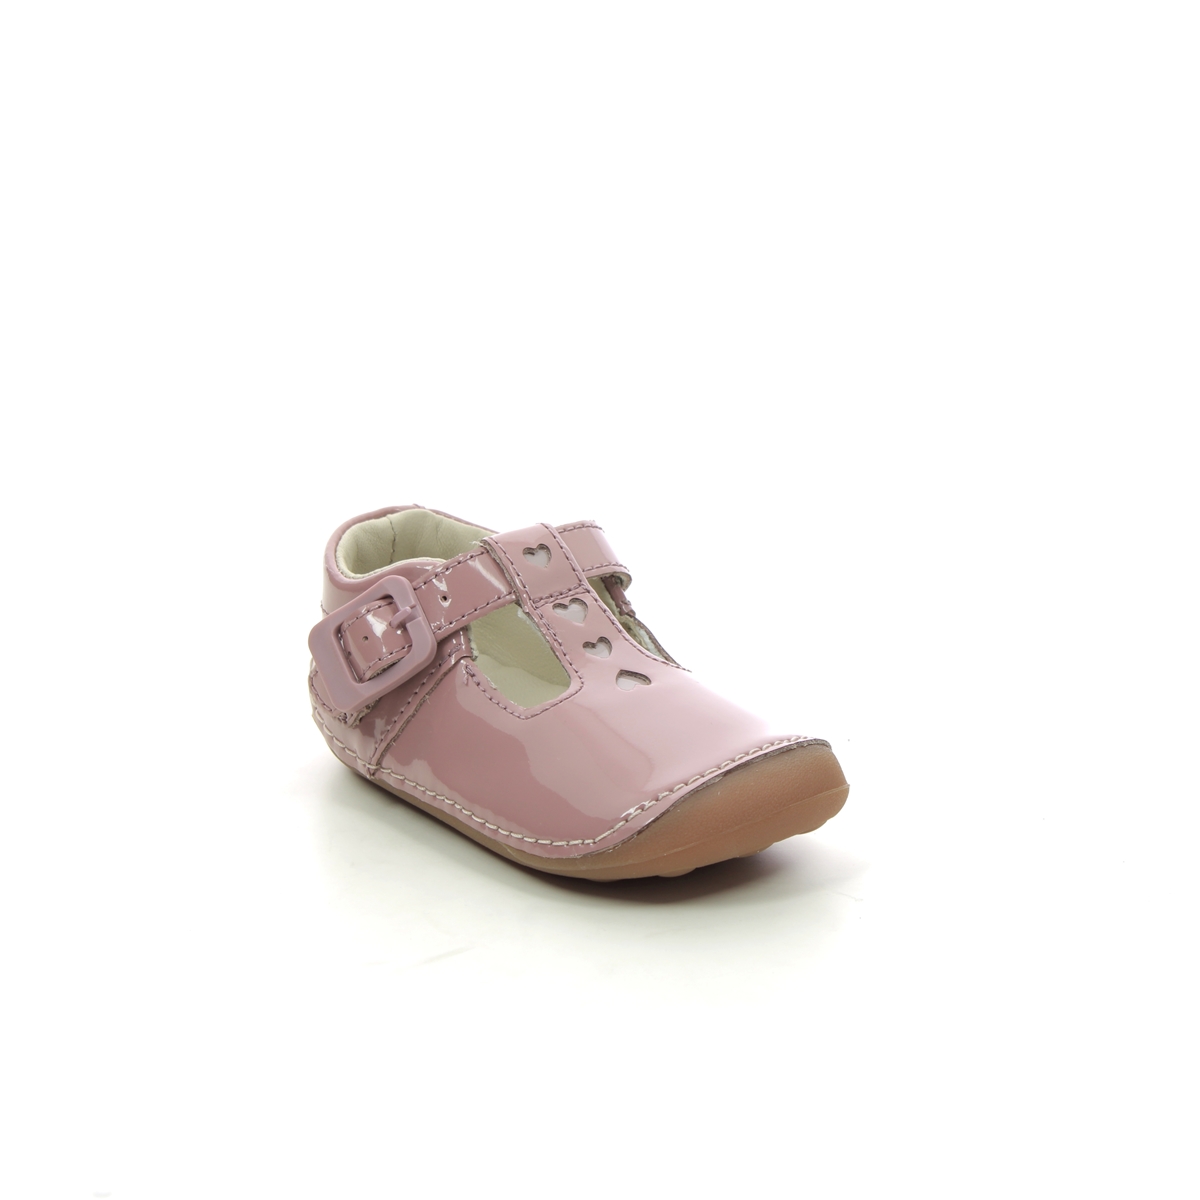 Clarks Tiny Beat T Pink Kids Girls First And Baby Shoes 694087G In Size 4.5 In Plain Pink G Width Fitting For kids